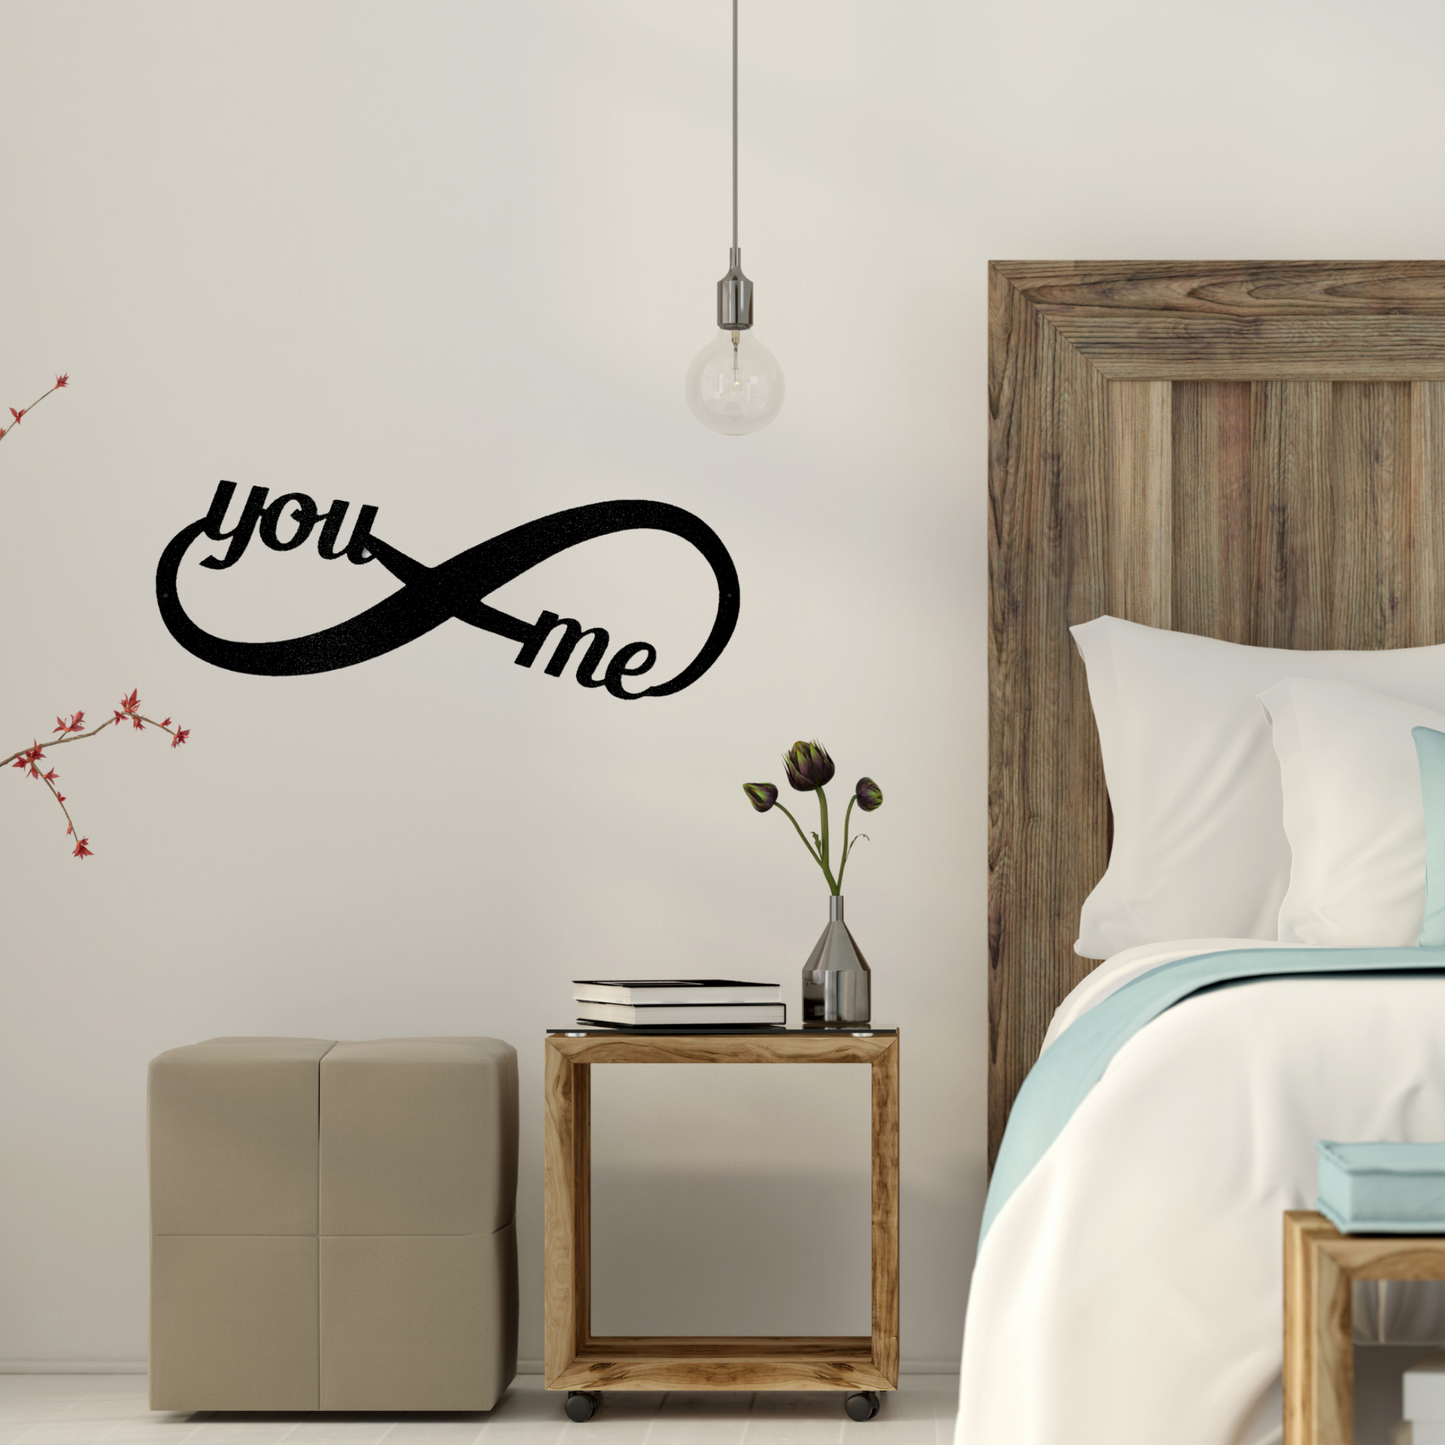 You and Me Infinity - Steel Sign, Family Name Sign, House Decor, Wall Art, Metal Signs, Metal Decorative Sign, Indoor Sign, Metal Monogram